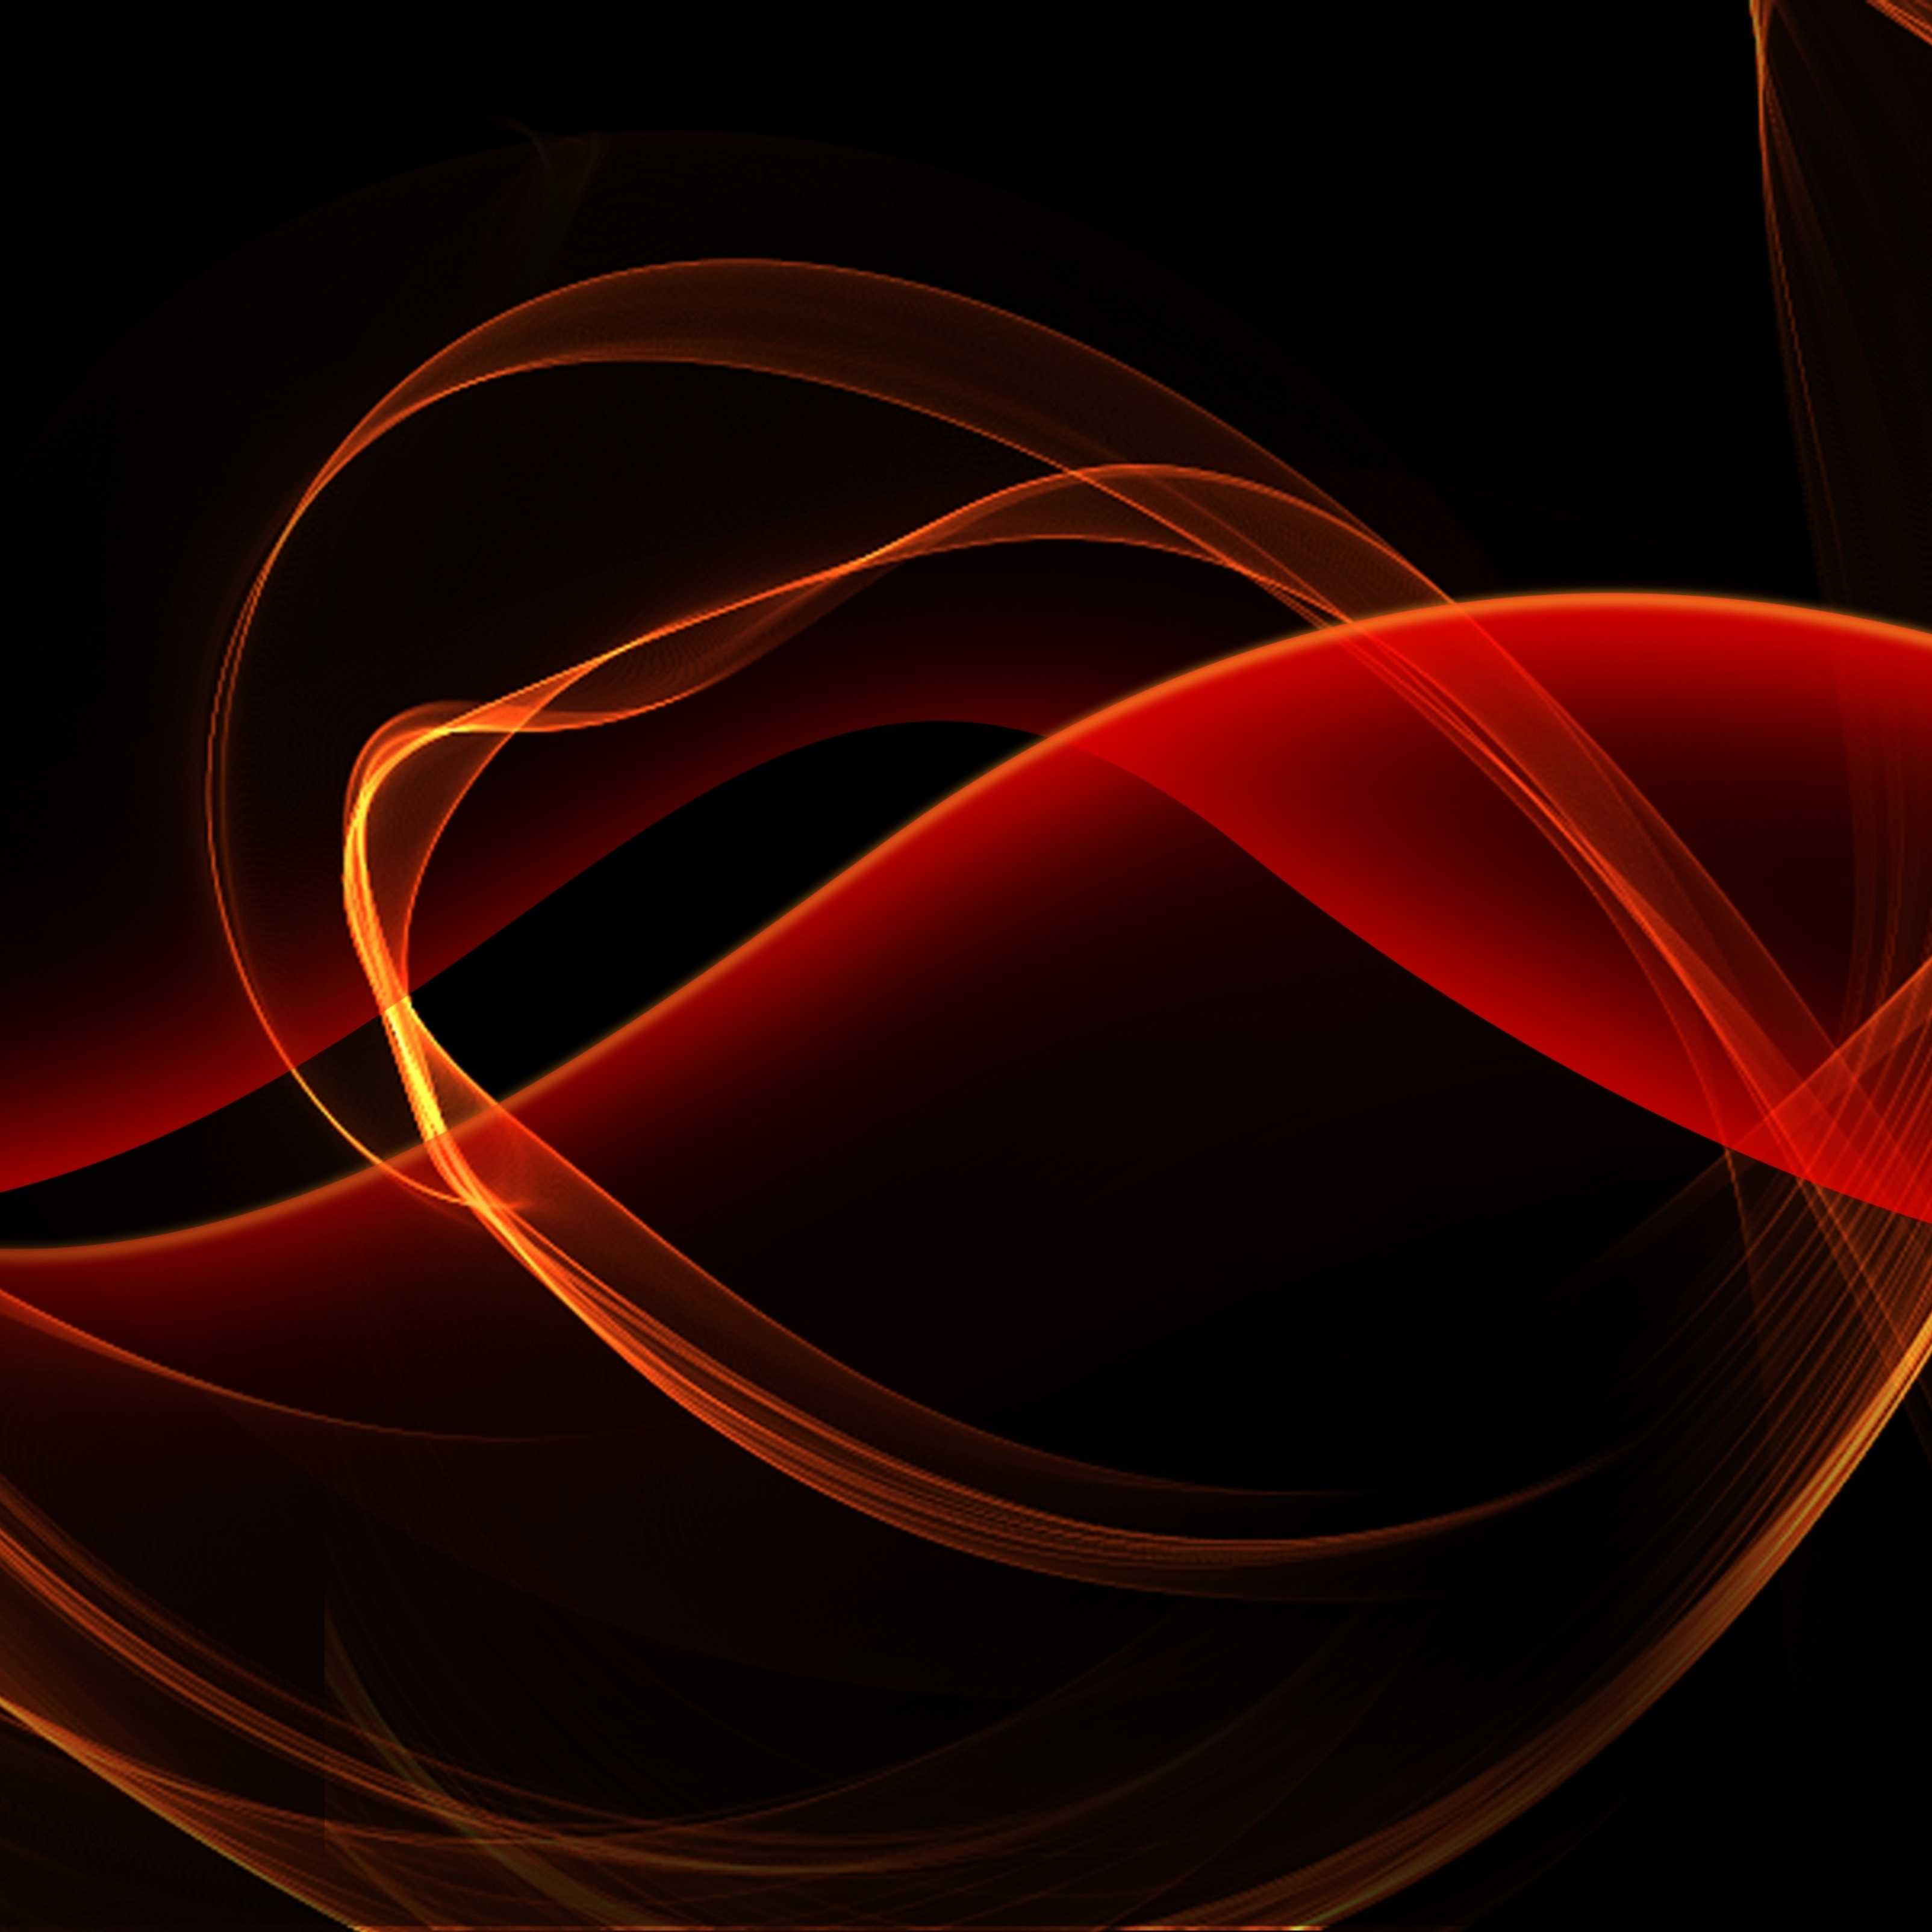 iPad Wallpapers Black and Red Glowing Curves iPad Wallpaper 3208x3208 px